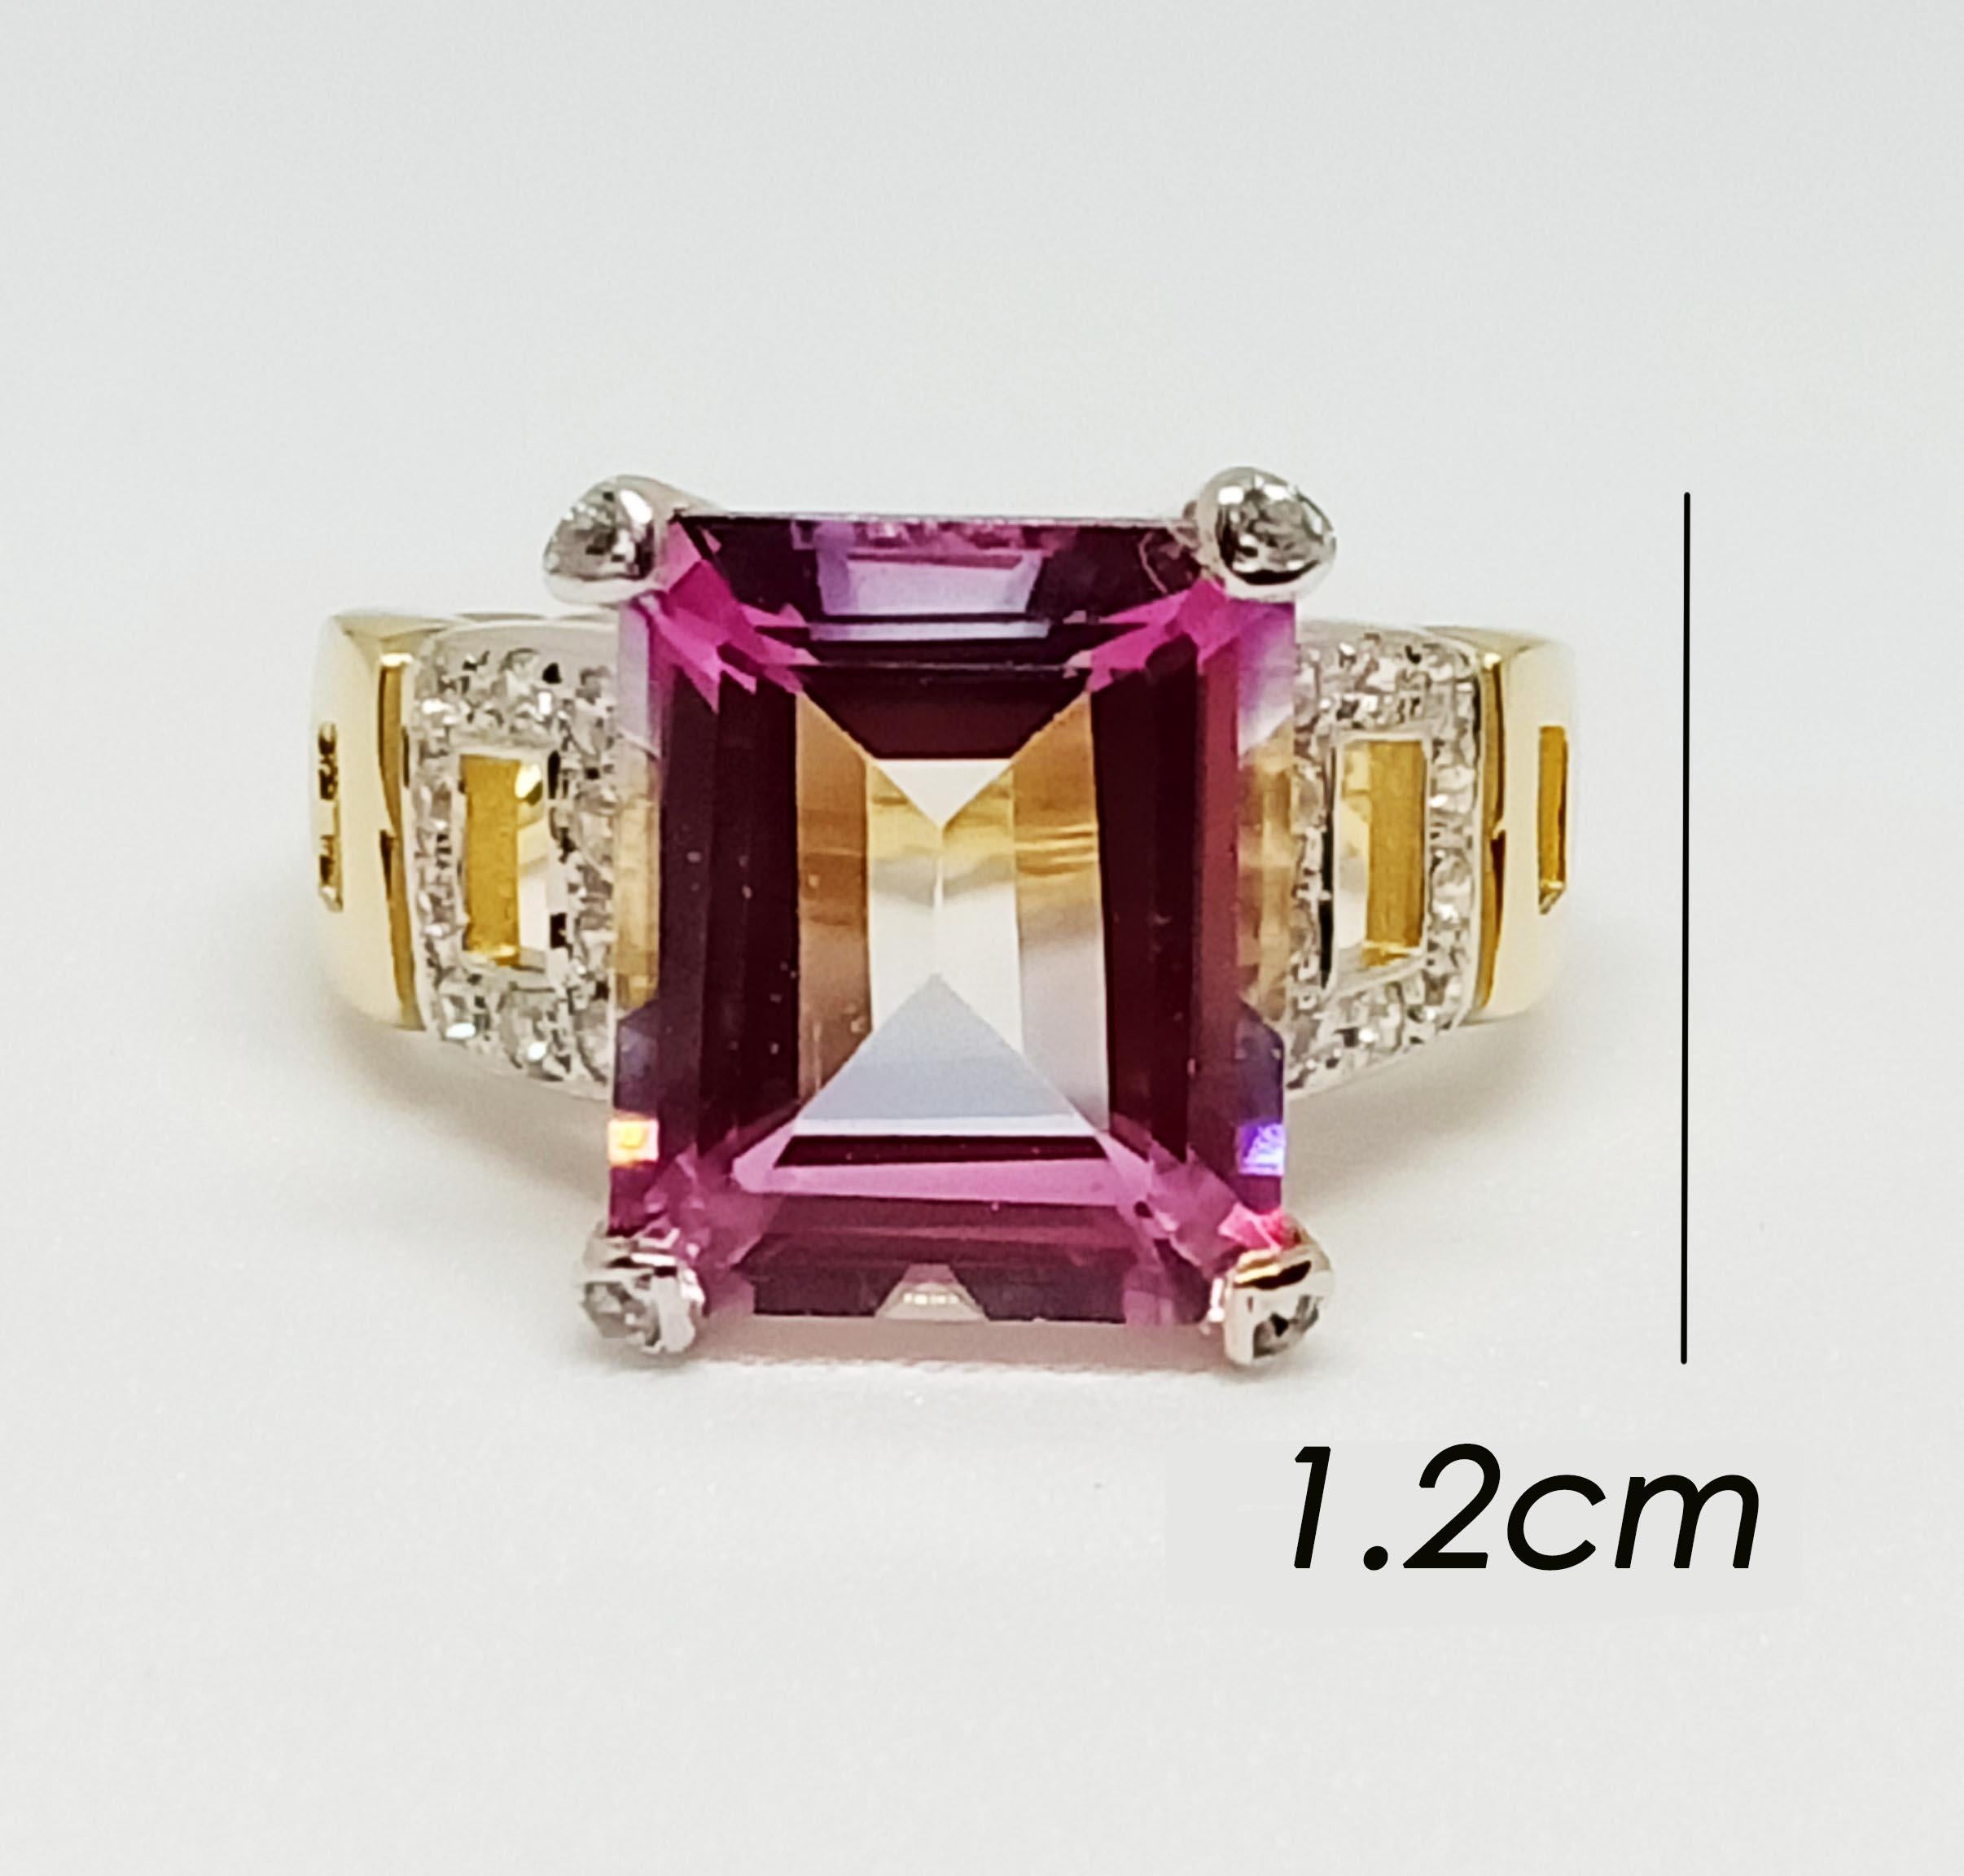 Pink topaz Octagon 12x10 mm. 7.60cts. 1 pc.
White zircon round 1.25 mm. 14 pcs.
18K goldplated over sterling silver.
size 7.25 us

Search (storefront , seller ) ornamento jewellery